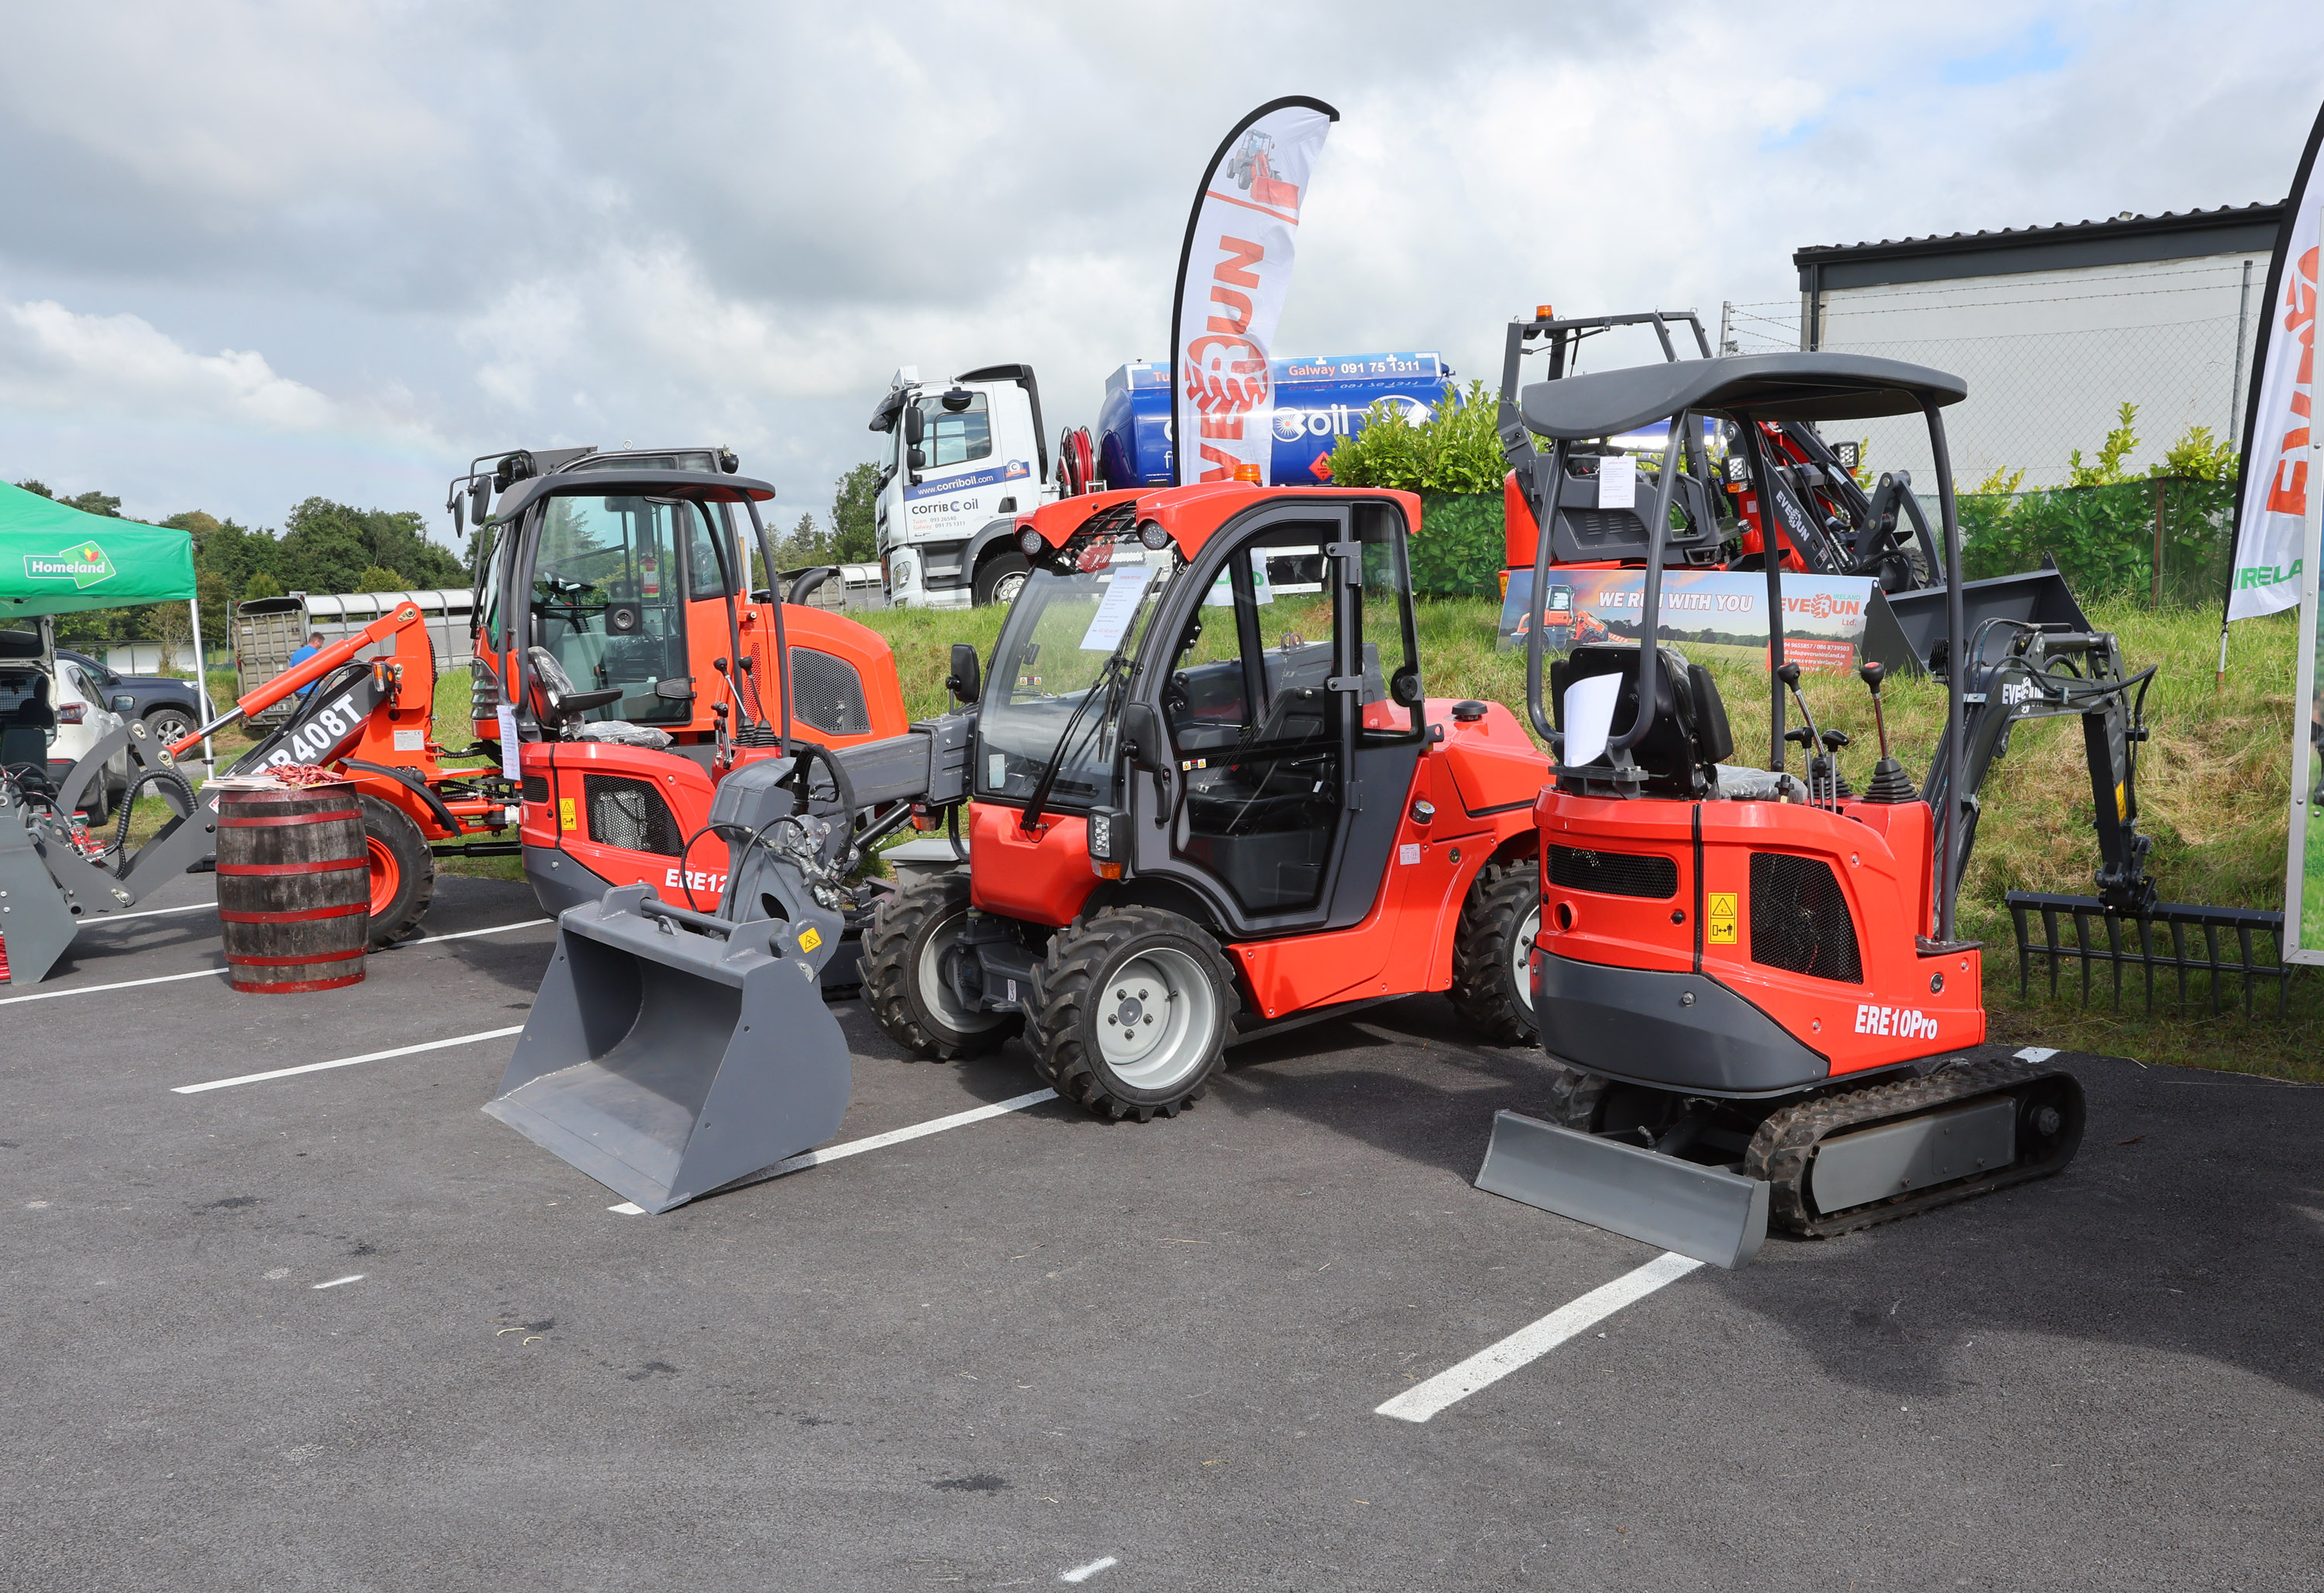 Some mini digger and compact loaders from Everun Ireland who are just down the road in Ballymoe, Co. Galway F45 RH28 at the 103rd Claremorris Show with one of the many Corrib Oil delivery tankers in the background. Photo © Michael Donnelly